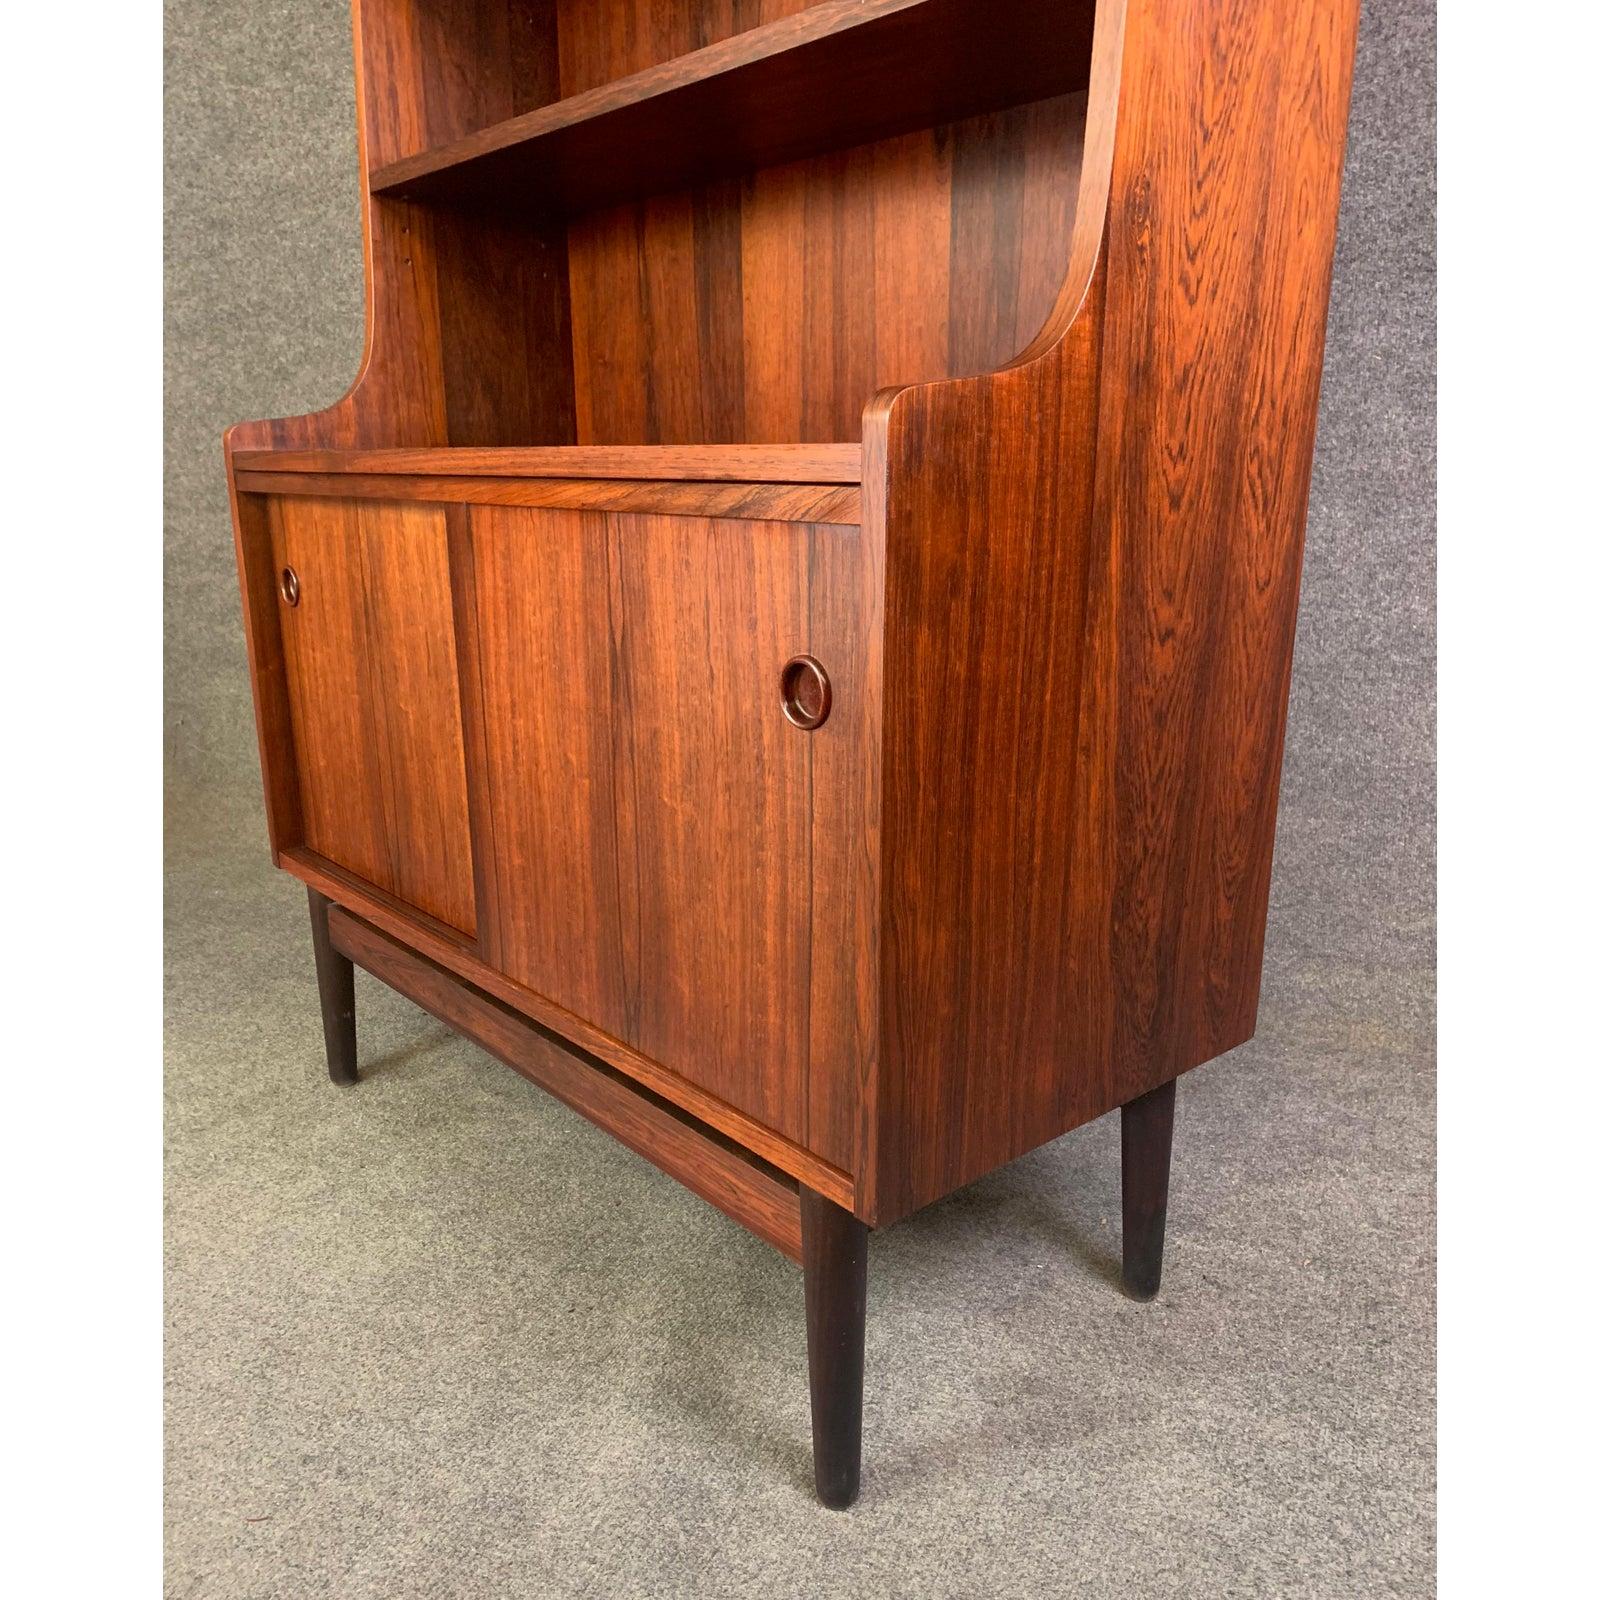 Vintage Danish Mid-Century Modern Rosewood Bookcase by Johannes Sorth In Good Condition For Sale In San Marcos, CA